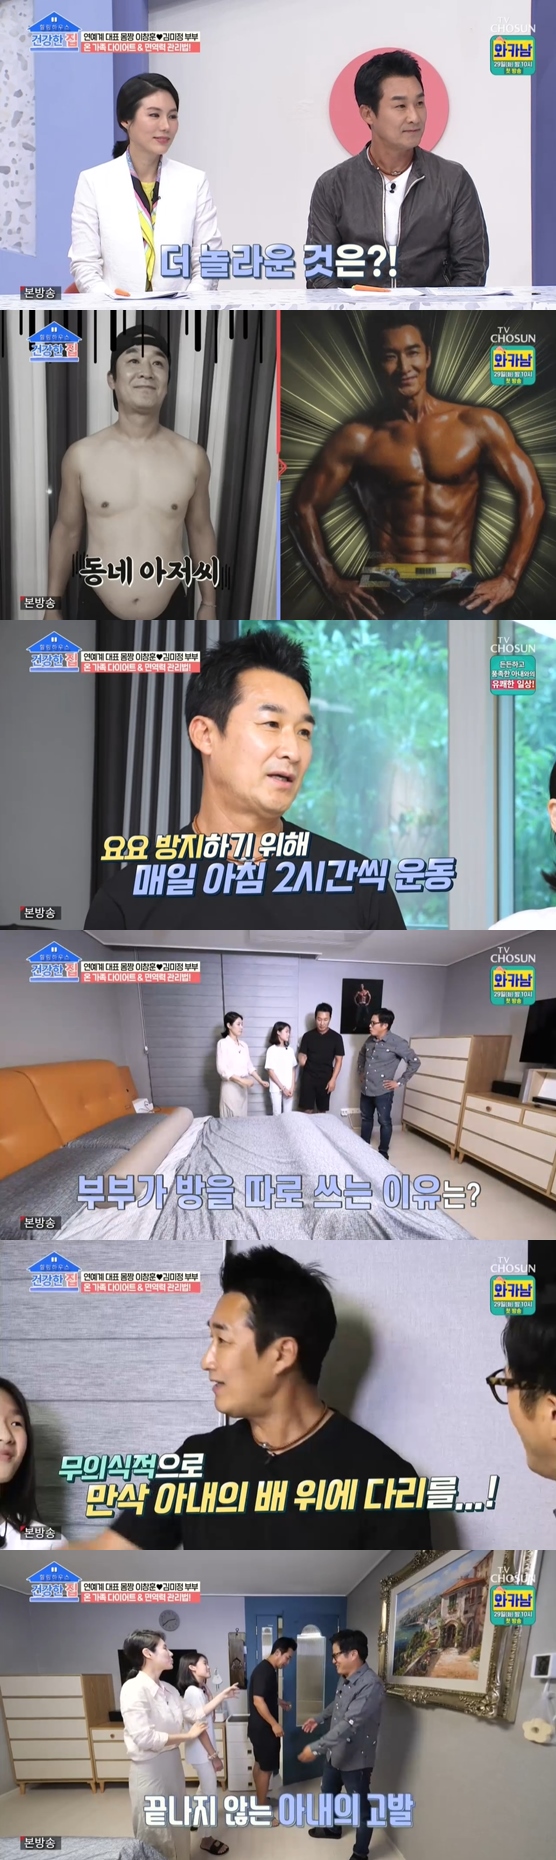 Lee Chang-hoon and Kim Mi-jung appeared on the TV Chosun Healthy House broadcast on the 28th, revealing the presence of Body Chan couple.Lee Chang-hoons wife Kim Mi-jung said, My husband has been working out and has become very healthy, but in my case, I am in my 40s next year.The child also had atopy, and all of it was related to immunity. Kim Mi-jung added, I care about eating habits and I care about immunity, and I wonder how to do it better.The houses of Lee Chang-hoon and Kim Mi-jung were then unveiled.Lee Chang-hoons six-pack photo on the wall, a spacious living room, a simple interior, attracted the attention of viewers. Cho Young-gu admired the house as a honeymoon house.Lee Chang-hoon added: Its been a year since I moved, this time my wife has done it all in her own style.His wife Kim Mi-jung laughed and laughed, The problem is that I walked two six-pack photos in the living room ....Kim Mi-jung said, My husband quit smoking and became fattening. I was very aware of my body and worked very hard last year.The couple also said they use the room separately, so Lee Chang-hoon said, I sleep together when I am full, and I have to have a pillow.But then I put my legs on my wifes boat without knowing it. It has been so far that I started to fall. Her daughter Hyoju also laughed at the use of her mother and father in each room, saying, It seems okay.Lee Chang-hoon said he is being managed by tennis and fitness as well as two hours of exercise every morning.Kim Mi-jung smiled, saying, No matter how much my husband drinks, I wake up at 6 am and walk the dog, drink a cup of coffee and play tennis.Lee Chang-hoon scored 90 on his own on health care, with the rest of the 10 points saying: I couldnt stop drinking, Ive cut a lot.In the past, I drank five days a week, but now it is two or three days. I work out to drink. I dont eat milk well, my intestines are very sensitive and weak, Im trying to eat with low salt and eating lactic acid bacteria, he said.Photo: TV Chosun Broadcasting Screen